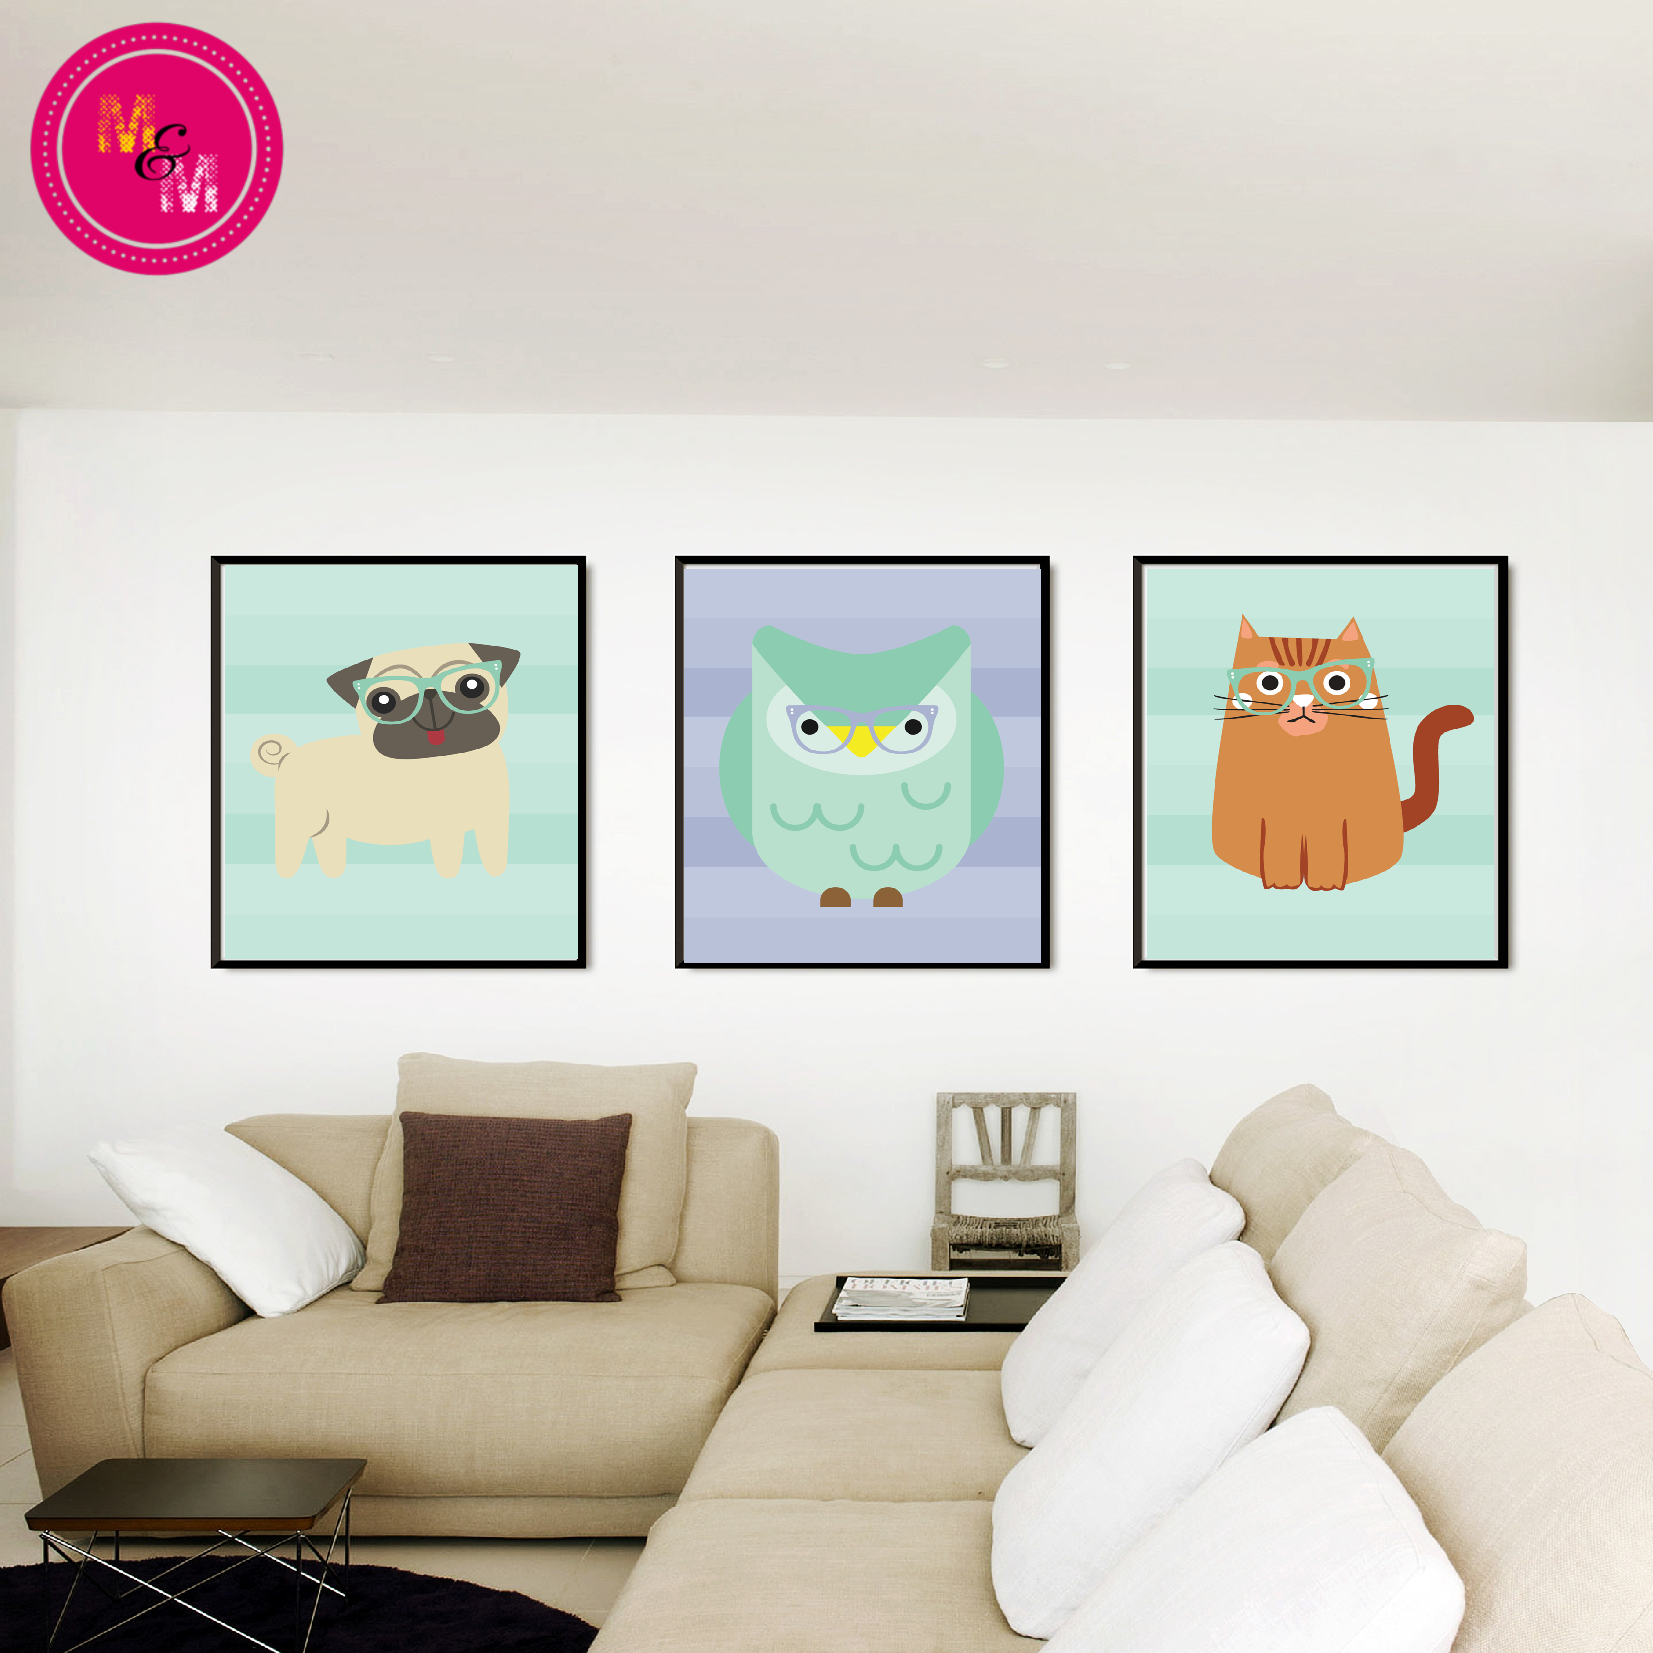 Instant Download-Hipster Cute Animal Set Owl, Dog, Cat Wall Print Set, Print at Home, Nursery wall decor, #Hipsterdog, #hipstercat AD3351 - mugandmousedesigns